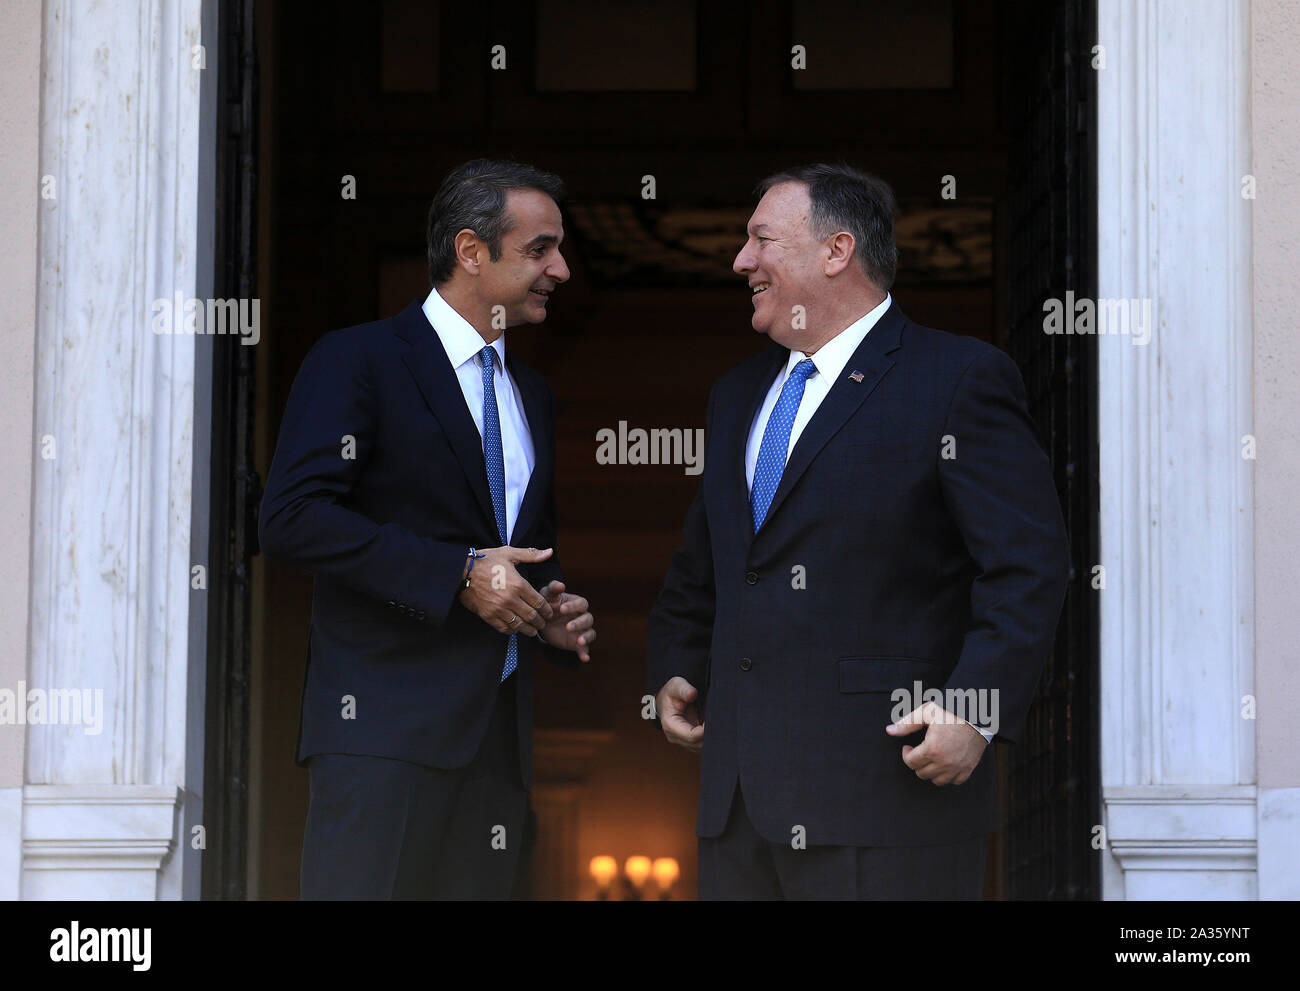 Athens, Greece. 5th Oct, 2019. Greek Prime Minister Kyriakos Mitsotakis (L) meets with U.S. Secretary of State Mike Pompeo in Athens, Greece, on Oct. 5, 2019. Credit: Marios Lolos/Xinhua/Alamy Live News Stock Photo